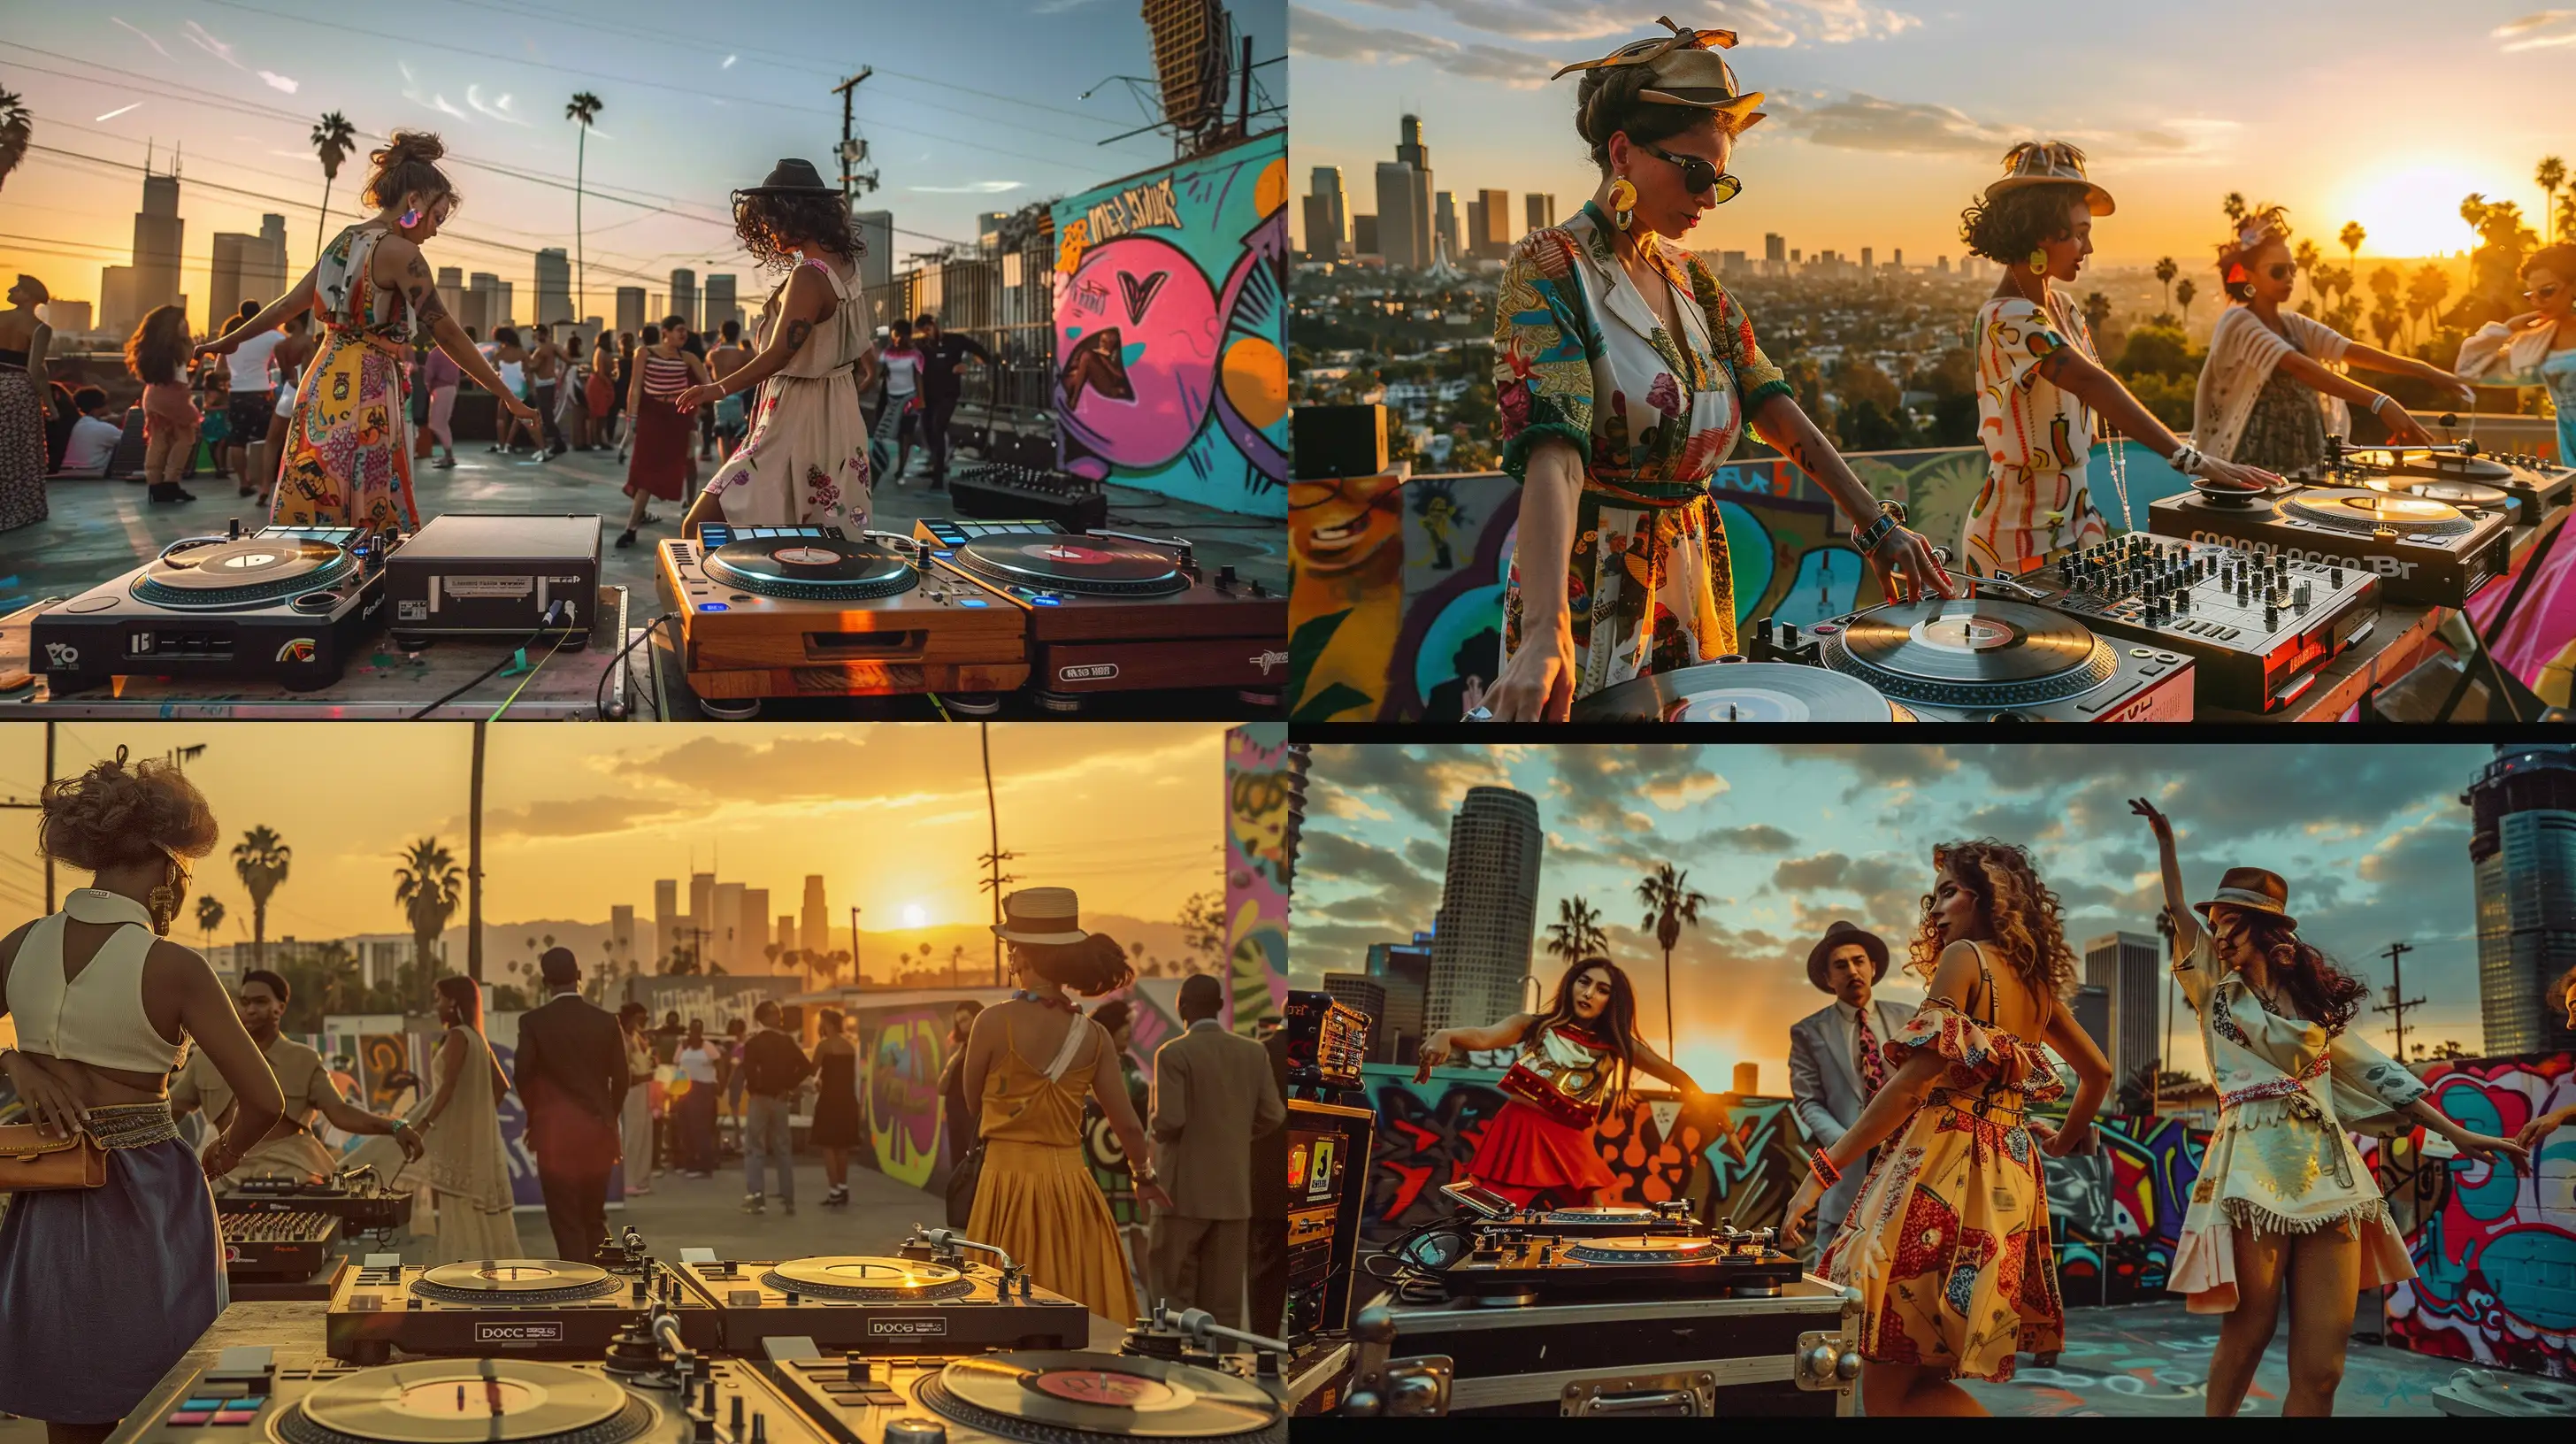 Vintage-Chicago-House-Club-Scene-Reimagined-in-Sunset-Cityscape-with-Elegant-Dancers